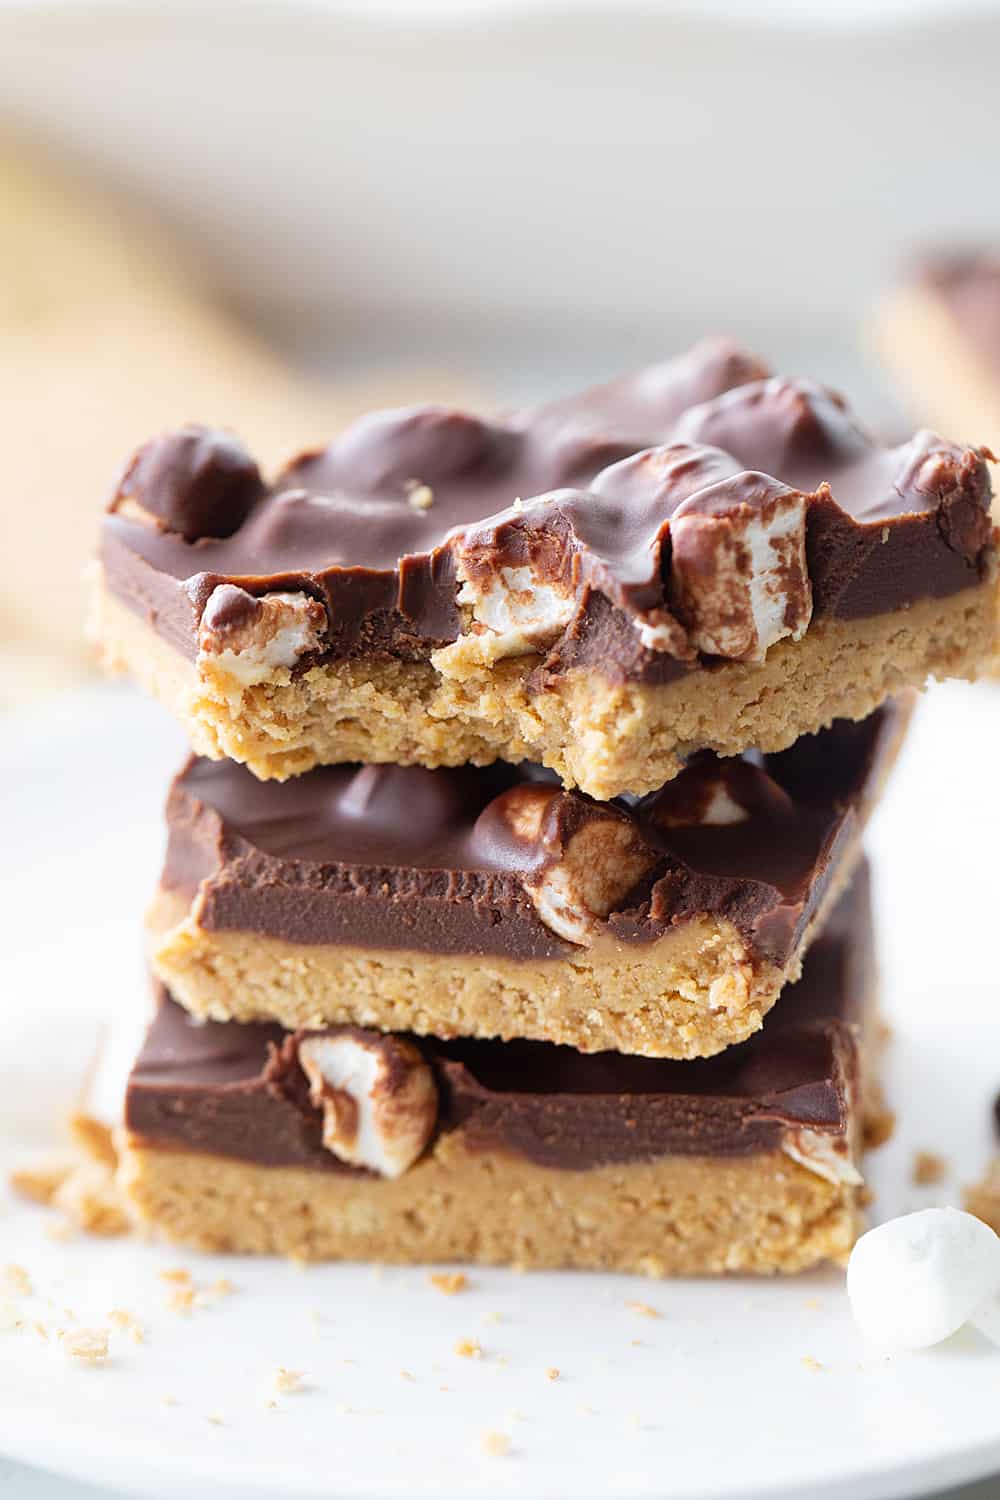 No Bake Peanut Butter S'mores Bars - No bake peanut butter s'mores bars have all the flavors and textures you could want in a chocolate, peanut buttery no-bake dessert! #smores #dessert #nobakedessert #nobake #halfscratched #chocolatepeanutbutter #peanutbutter #easyrecipe #baking